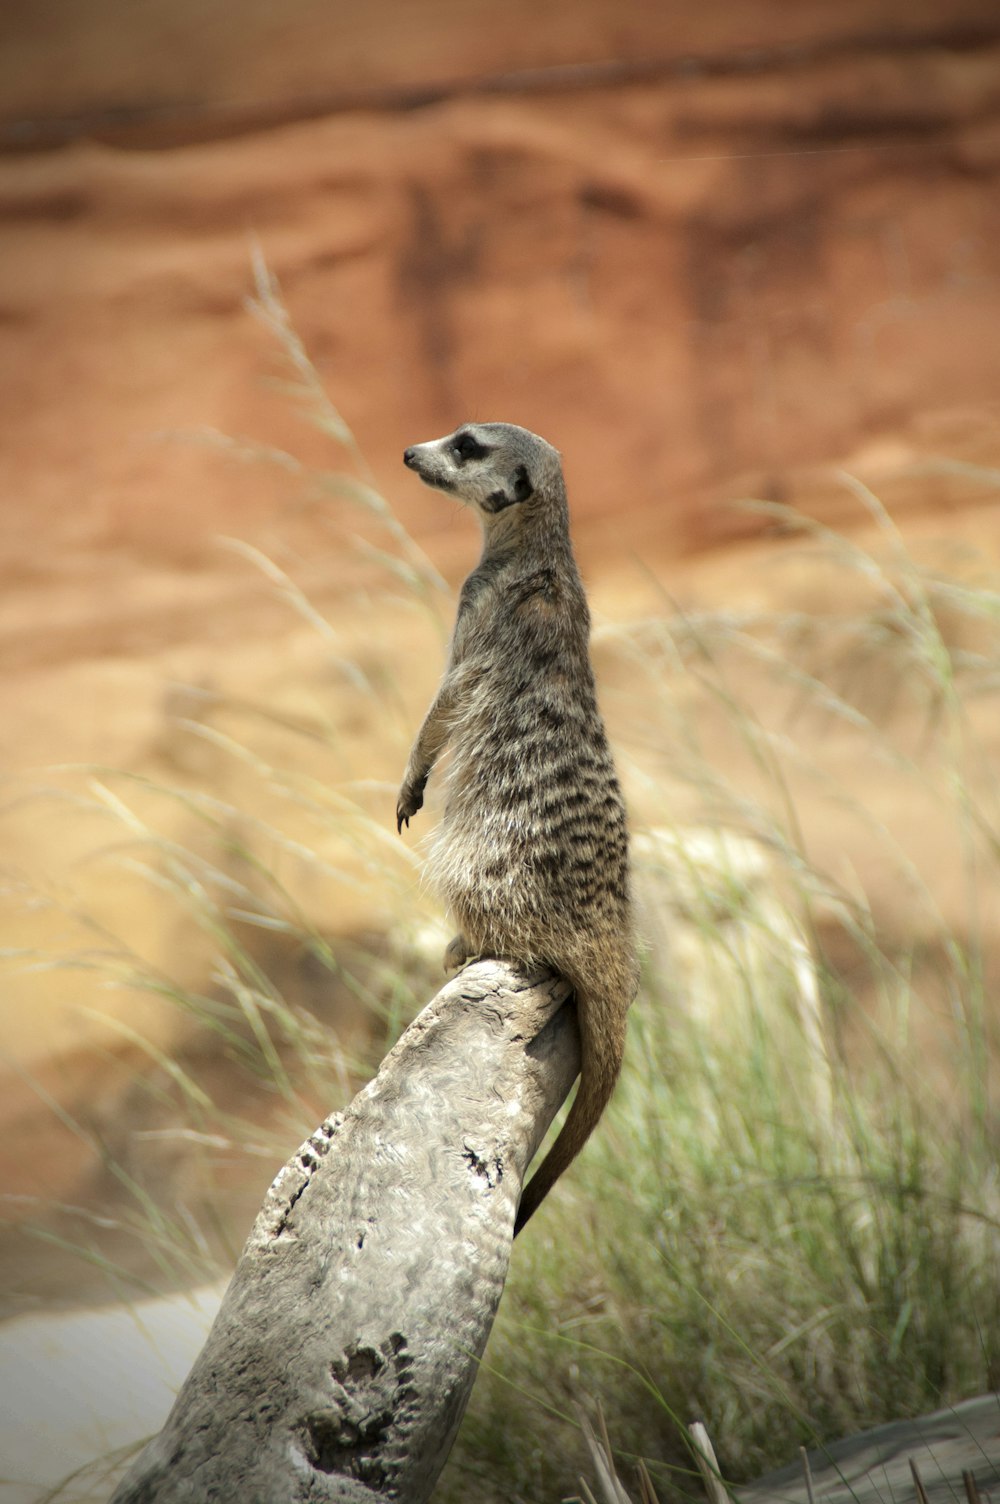 a meerkat standing on a log in a field